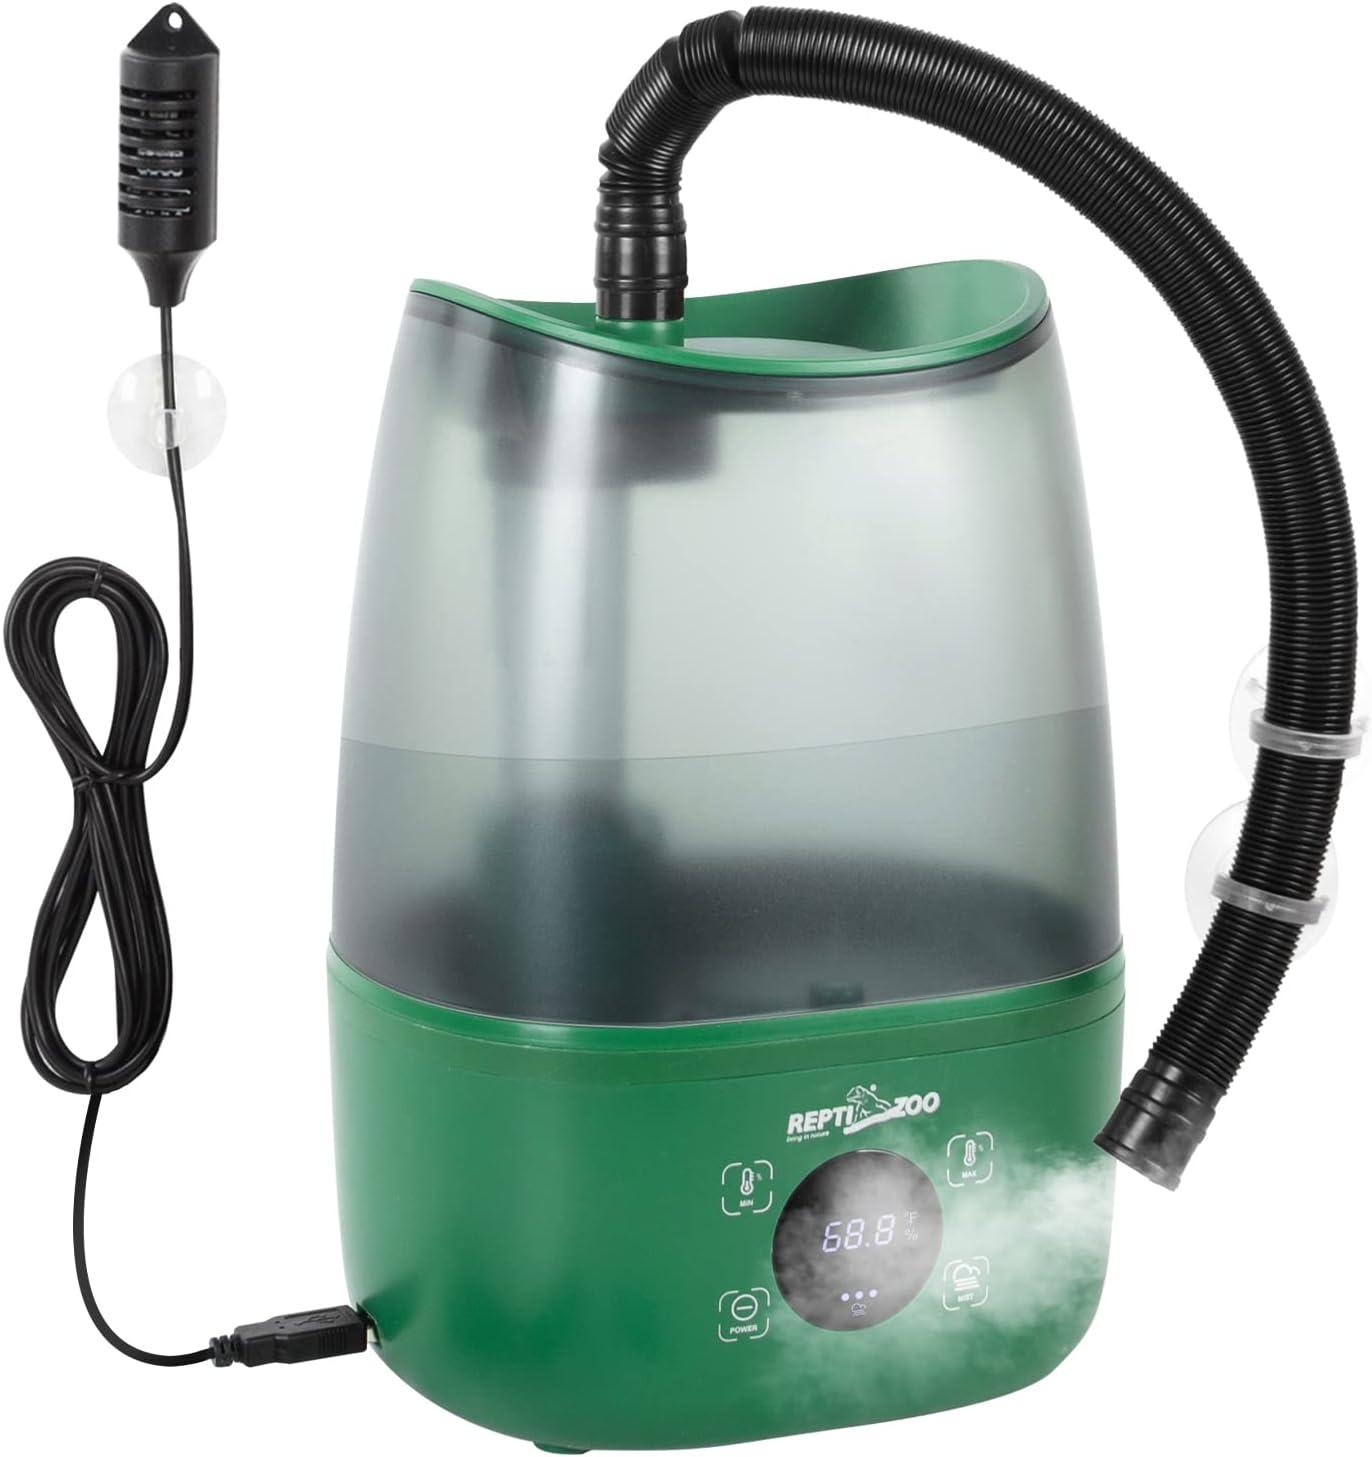 REPTIZOO Reptile Humidifier Fogger, 4L, Large, with Humidity Control, Retail $70.00